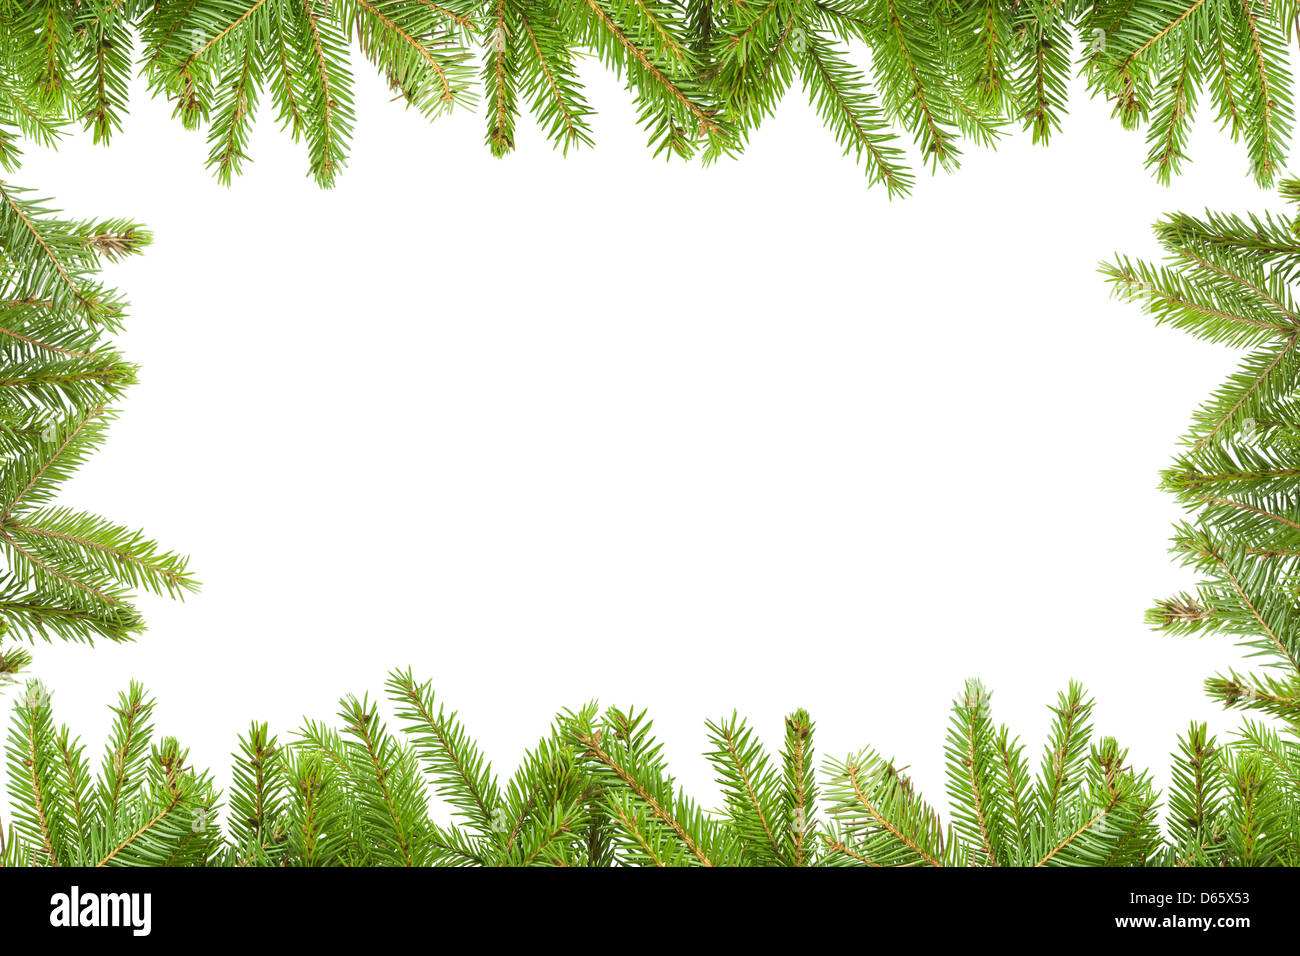 Spruce branches on a white background Stock Photo